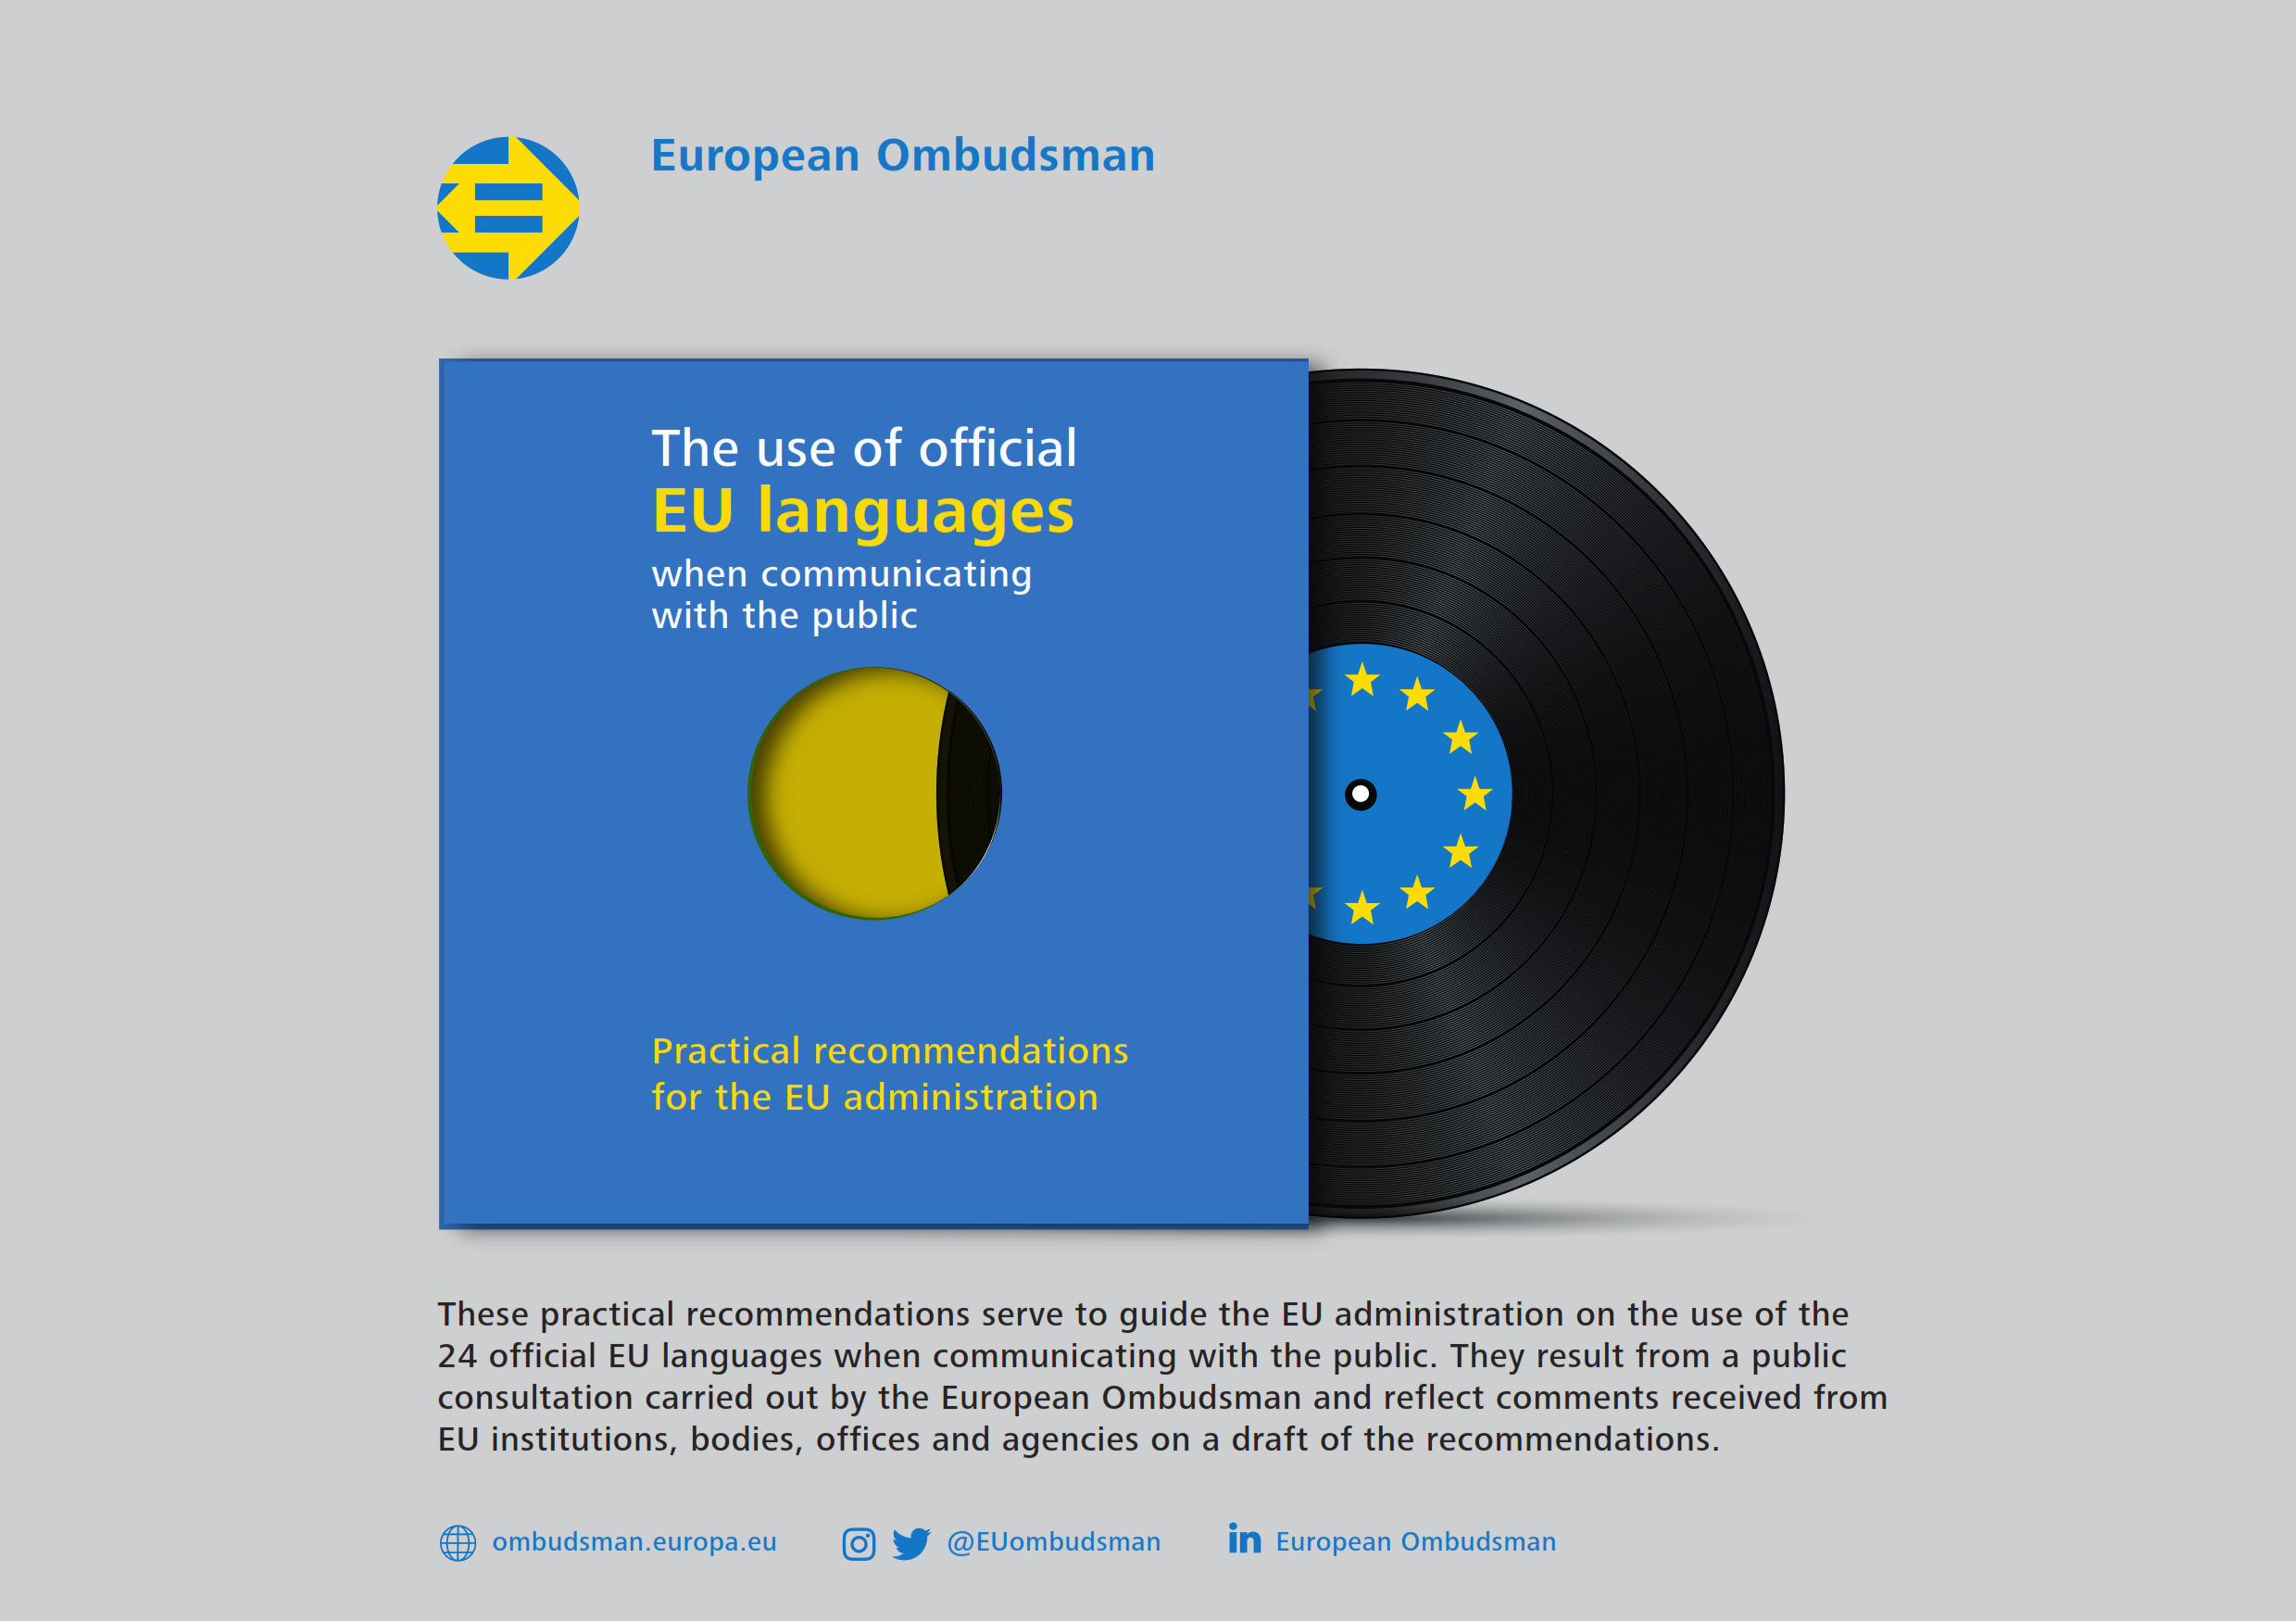 The use of official EU languages when communicating with the public - Practical recommendations for the EU administration